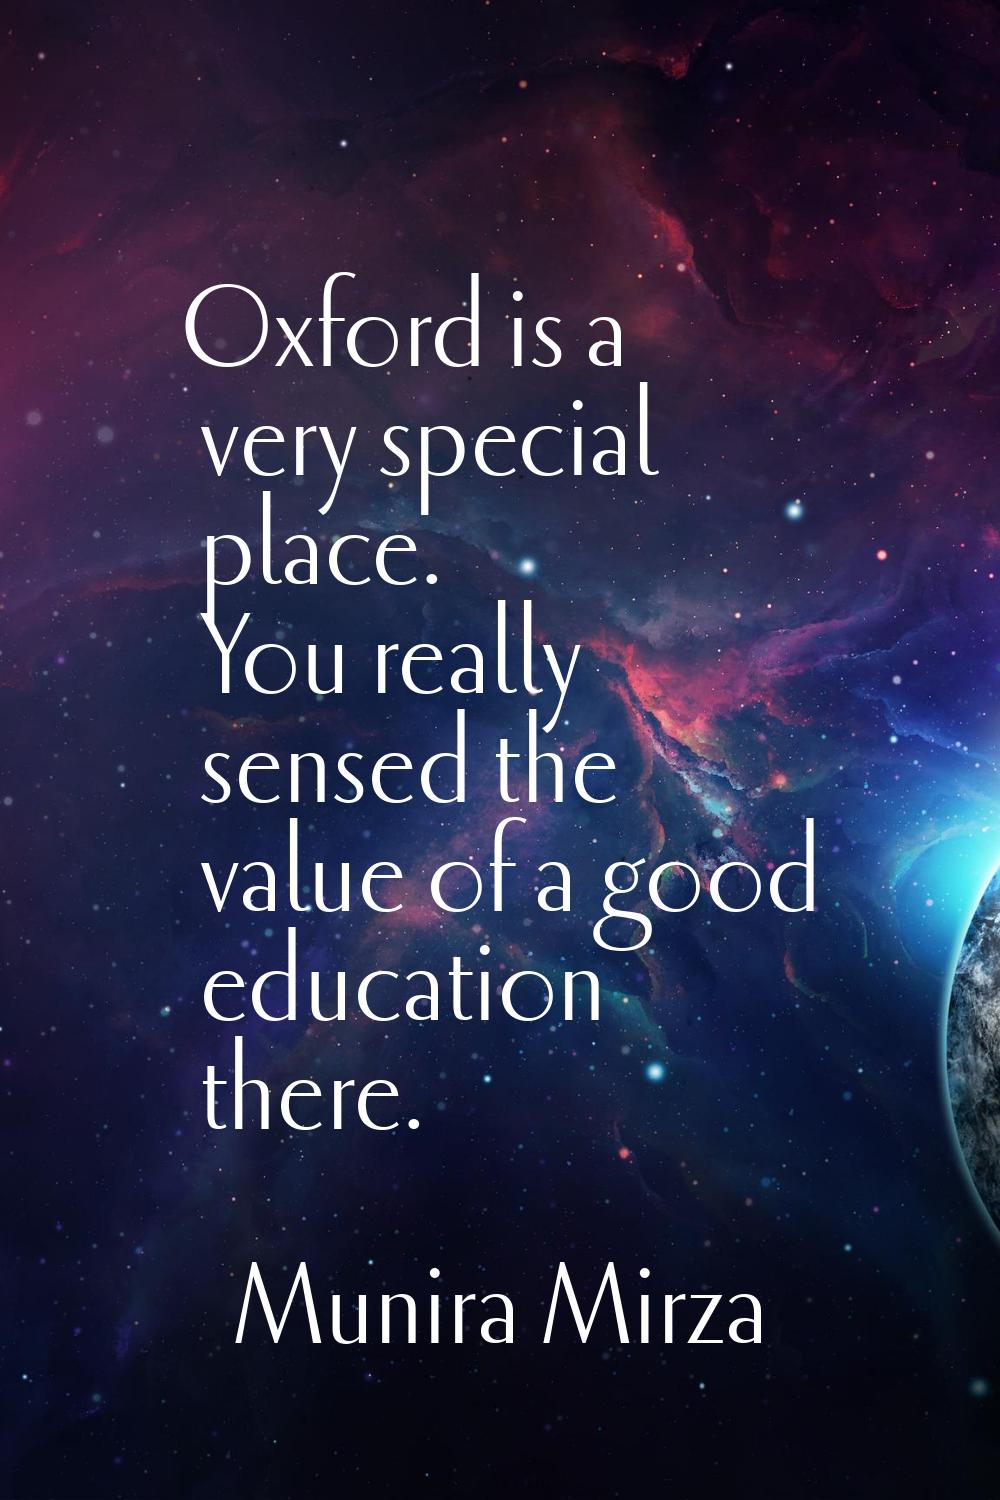 Oxford is a very special place. You really sensed the value of a good education there.